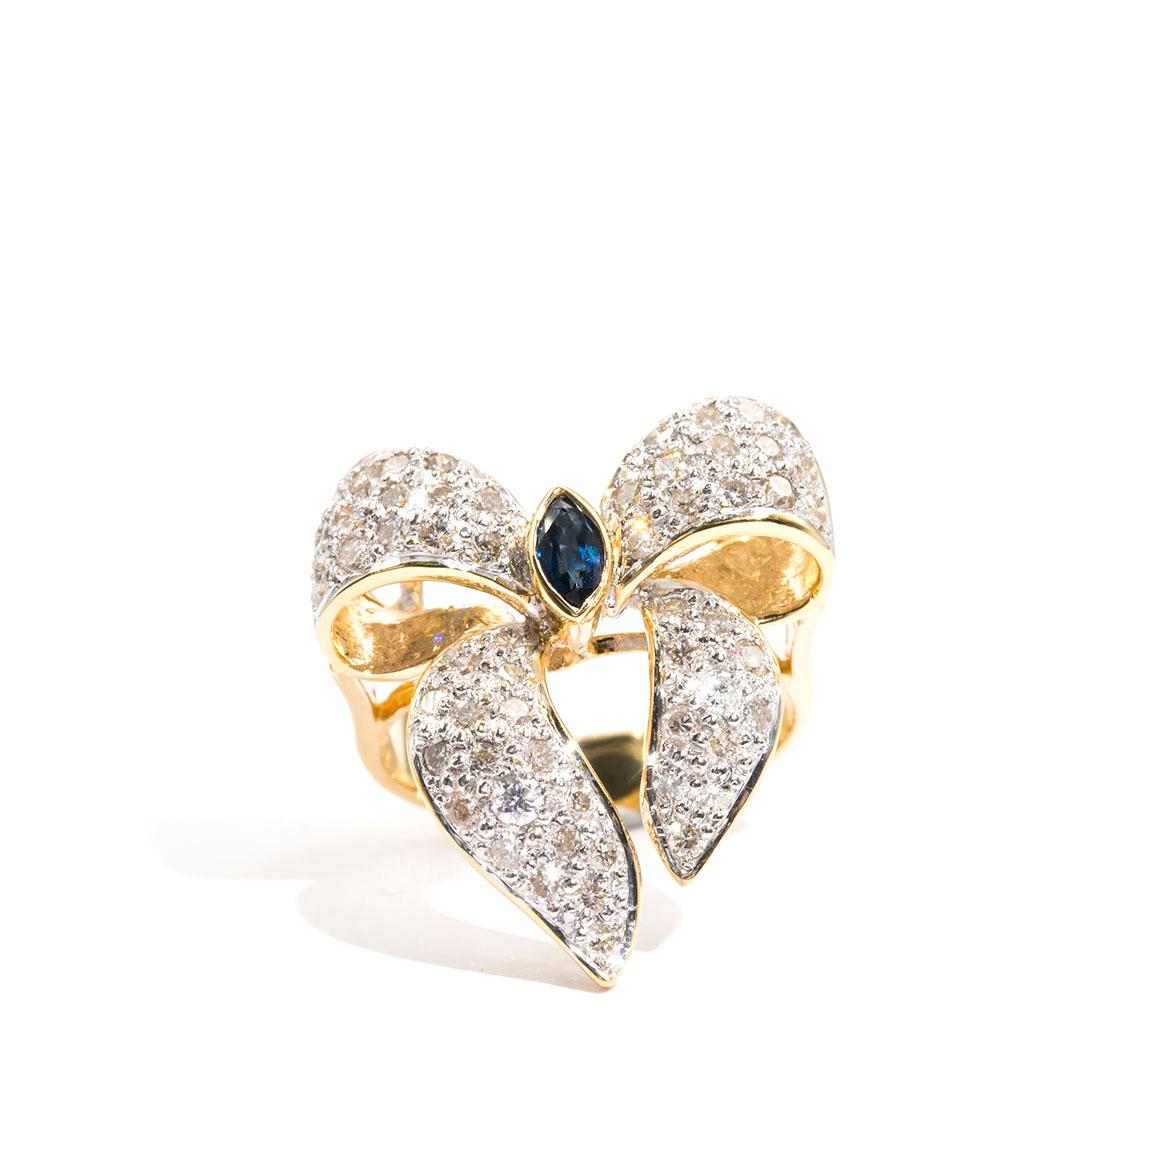 Carefully forged in 18 carat yellow gold is this ever so charming vintage bow cluster ring embellished with 0.80 carats of round brilliant cut diamonds encompassing a marquise natural blue sapphire. We have named this gorgeous vintage splendour The